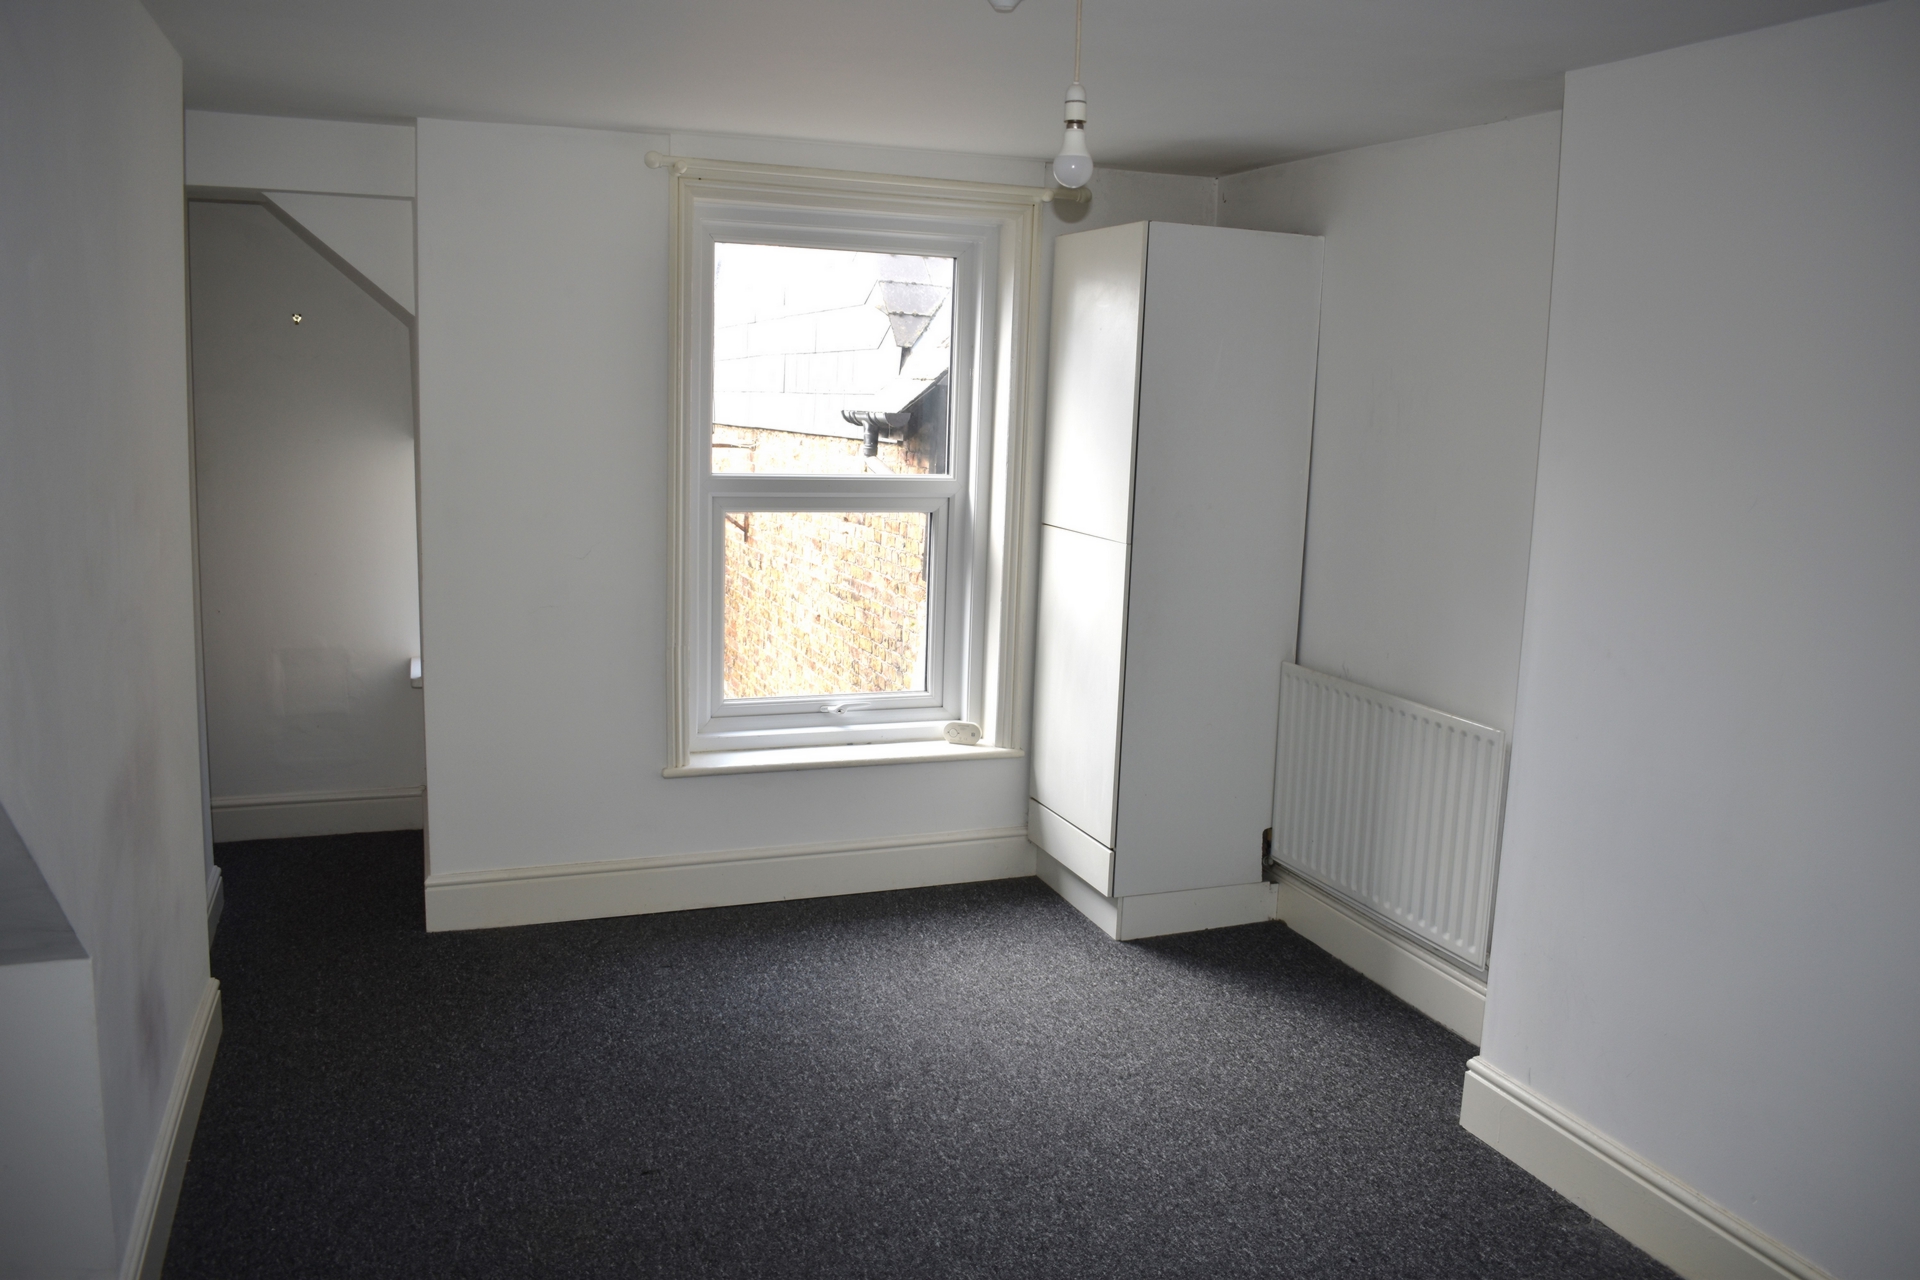 1 bed flat to rent in Albion Street - Property Image 1